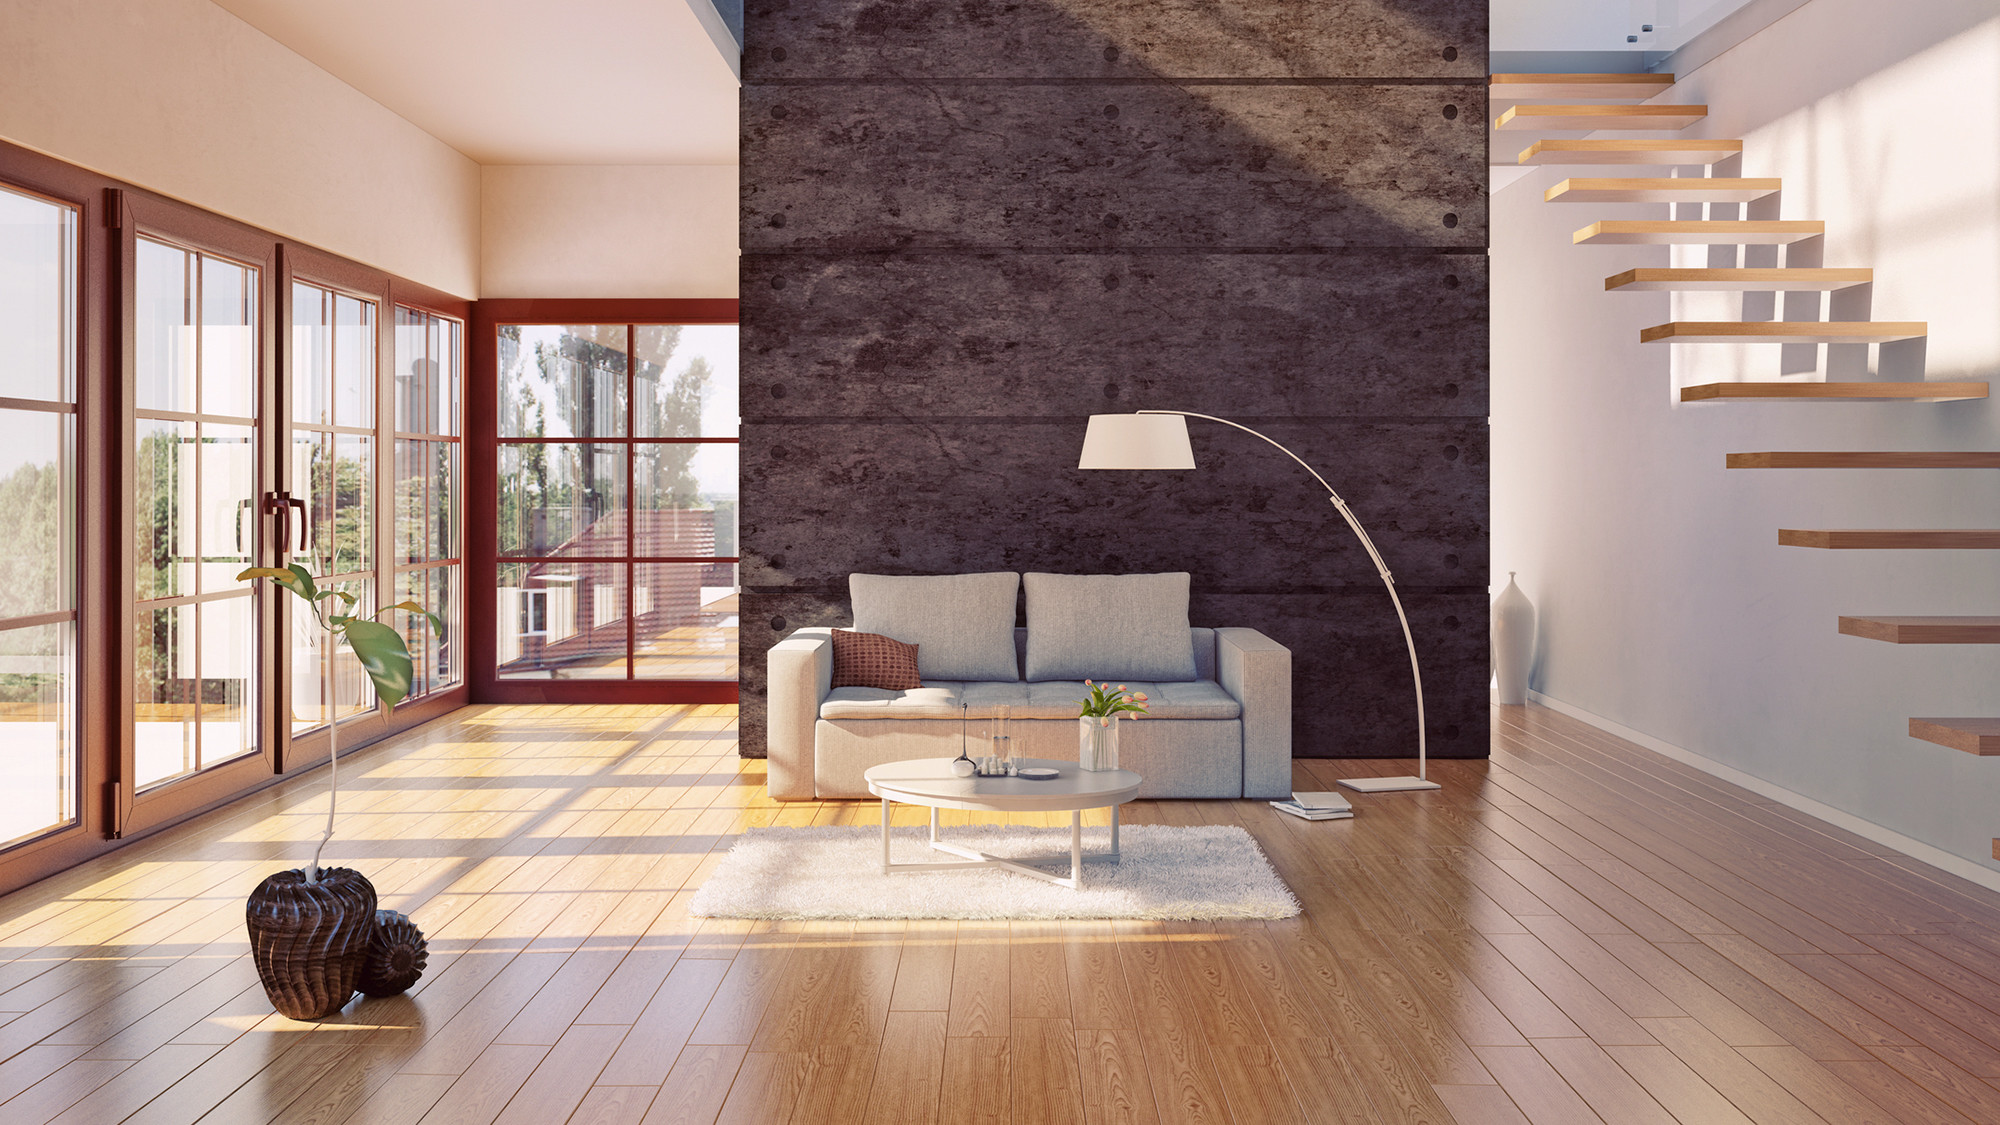 19 attractive Laminate or Engineered Hardwood Flooring which is Better 2024 free download laminate or engineered hardwood flooring which is better of do hardwood floors provide the best return on investment realtor coma with hardwood floors investment